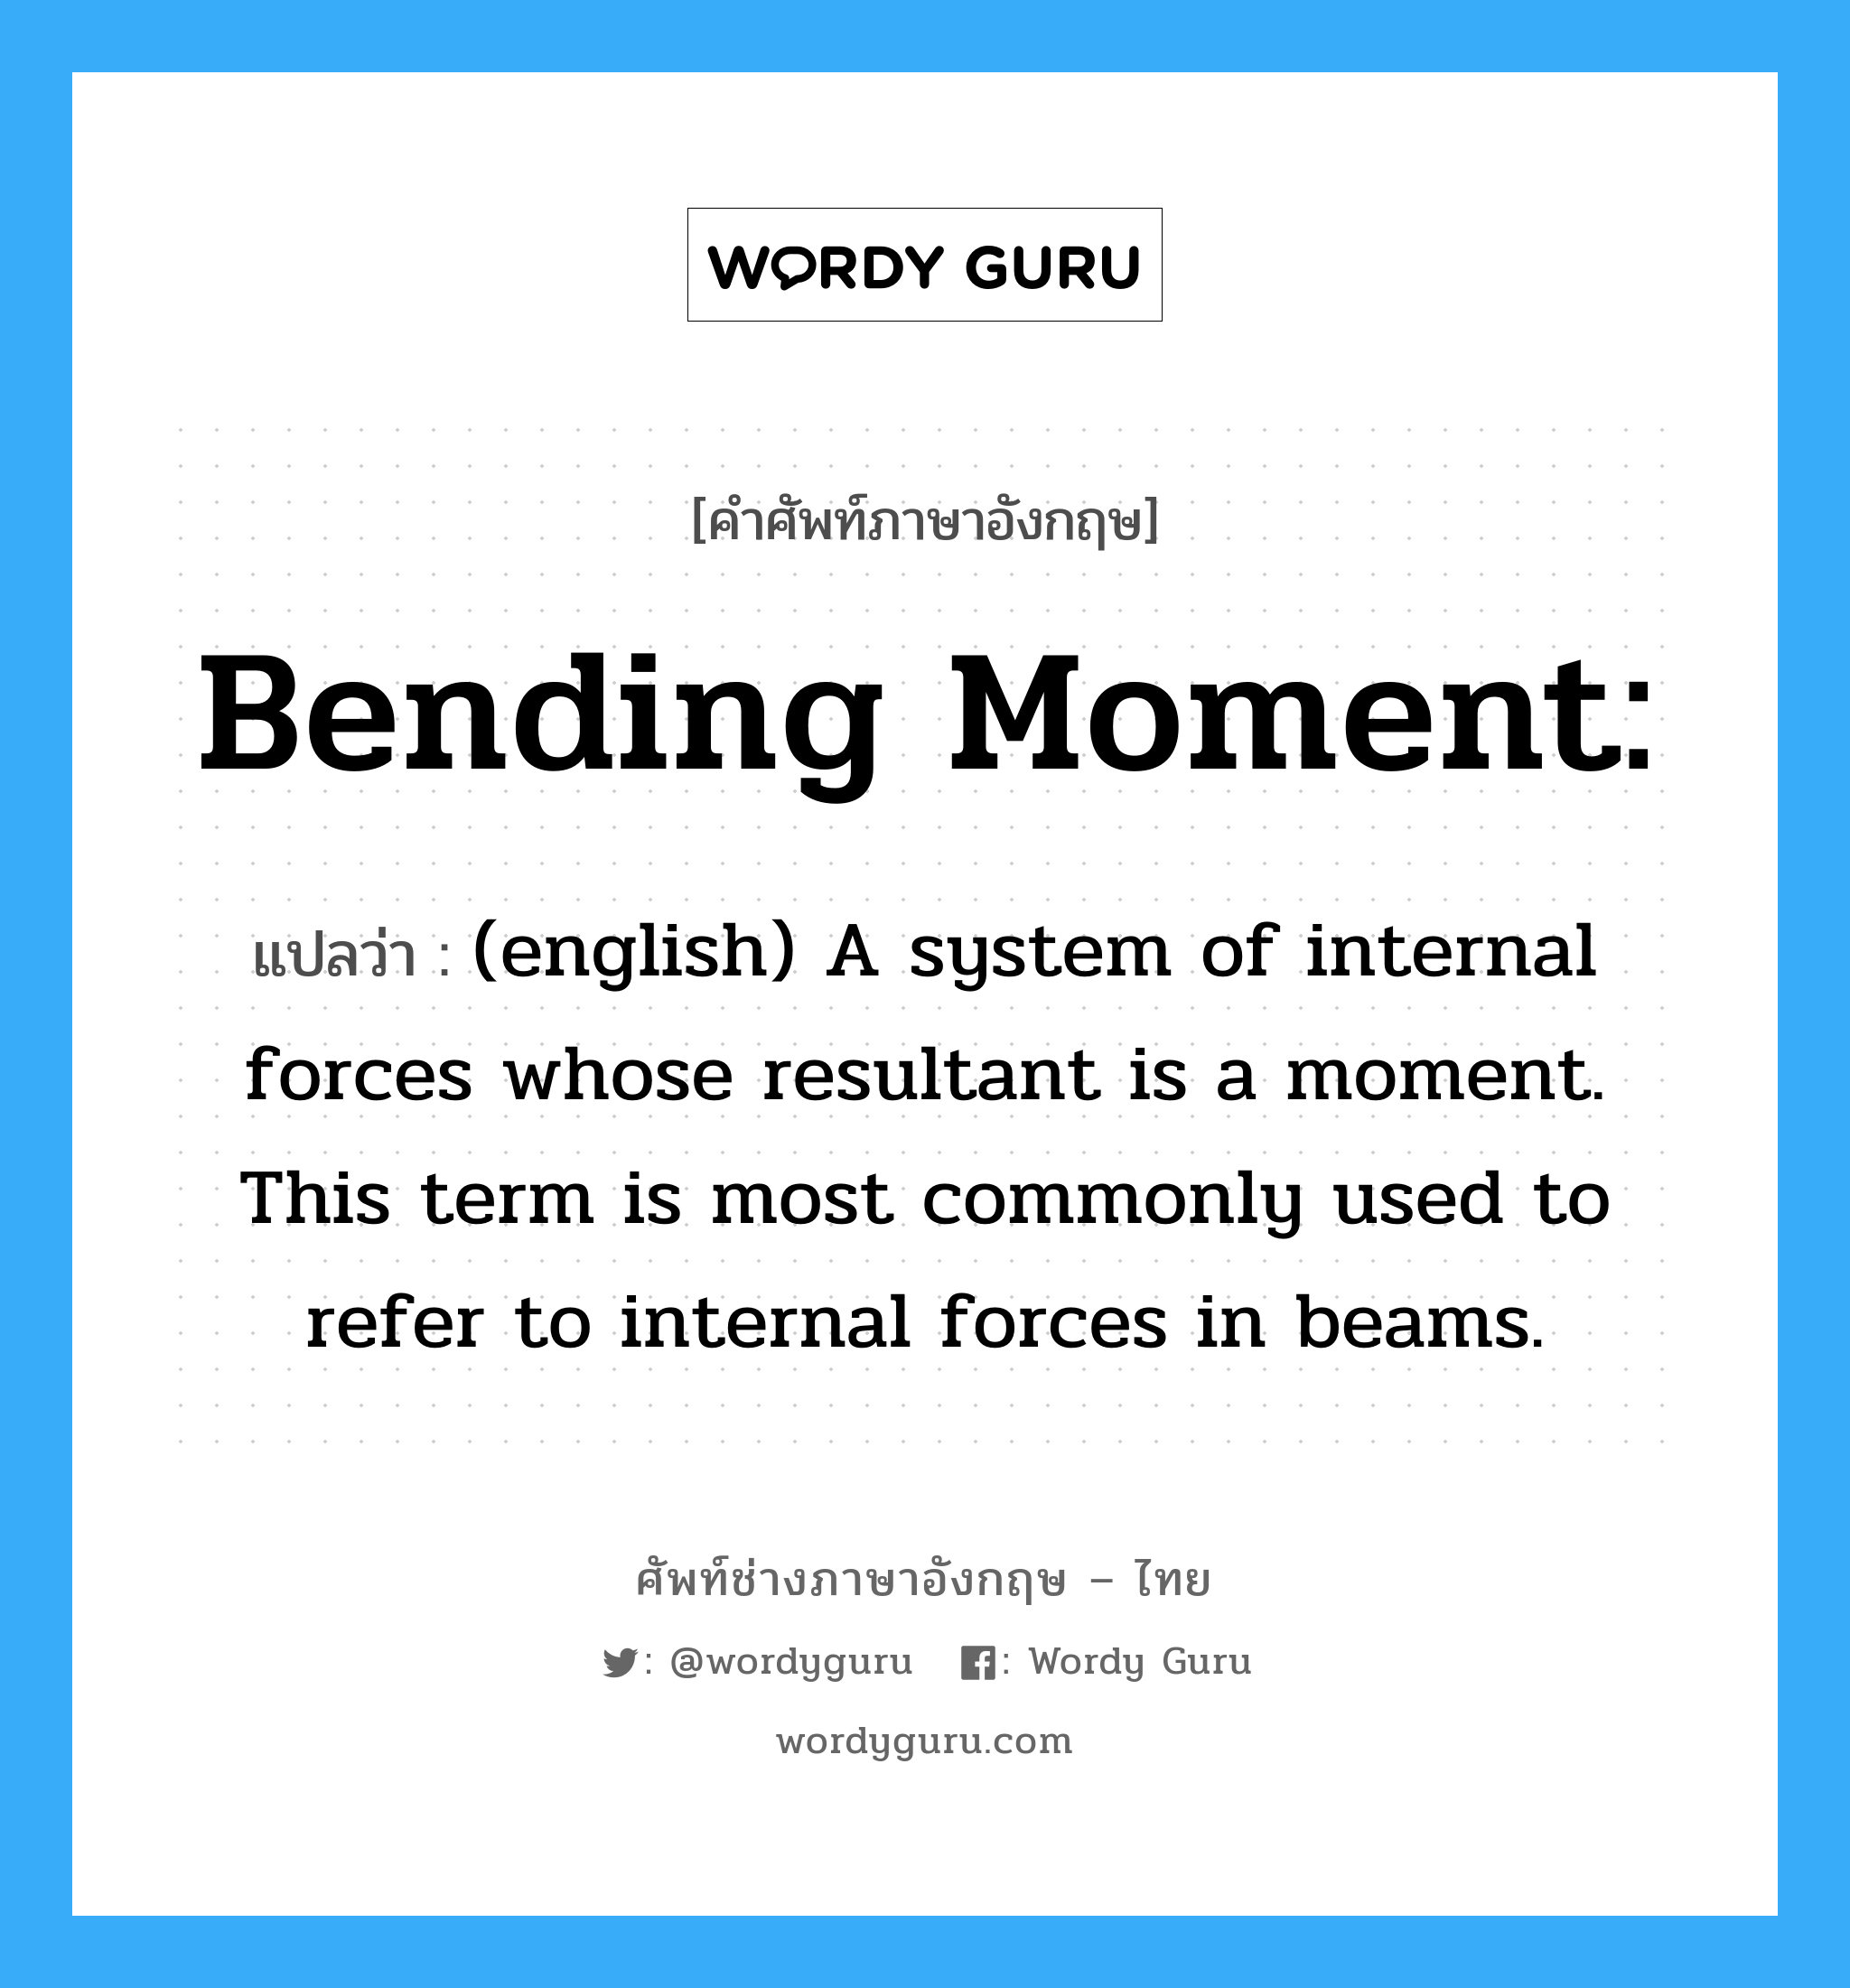 Bending moment: แปลว่า?, คำศัพท์ช่างภาษาอังกฤษ - ไทย Bending moment: คำศัพท์ภาษาอังกฤษ Bending moment: แปลว่า (english) A system of internal forces whose resultant is a moment. This term is most commonly used to refer to internal forces in beams.